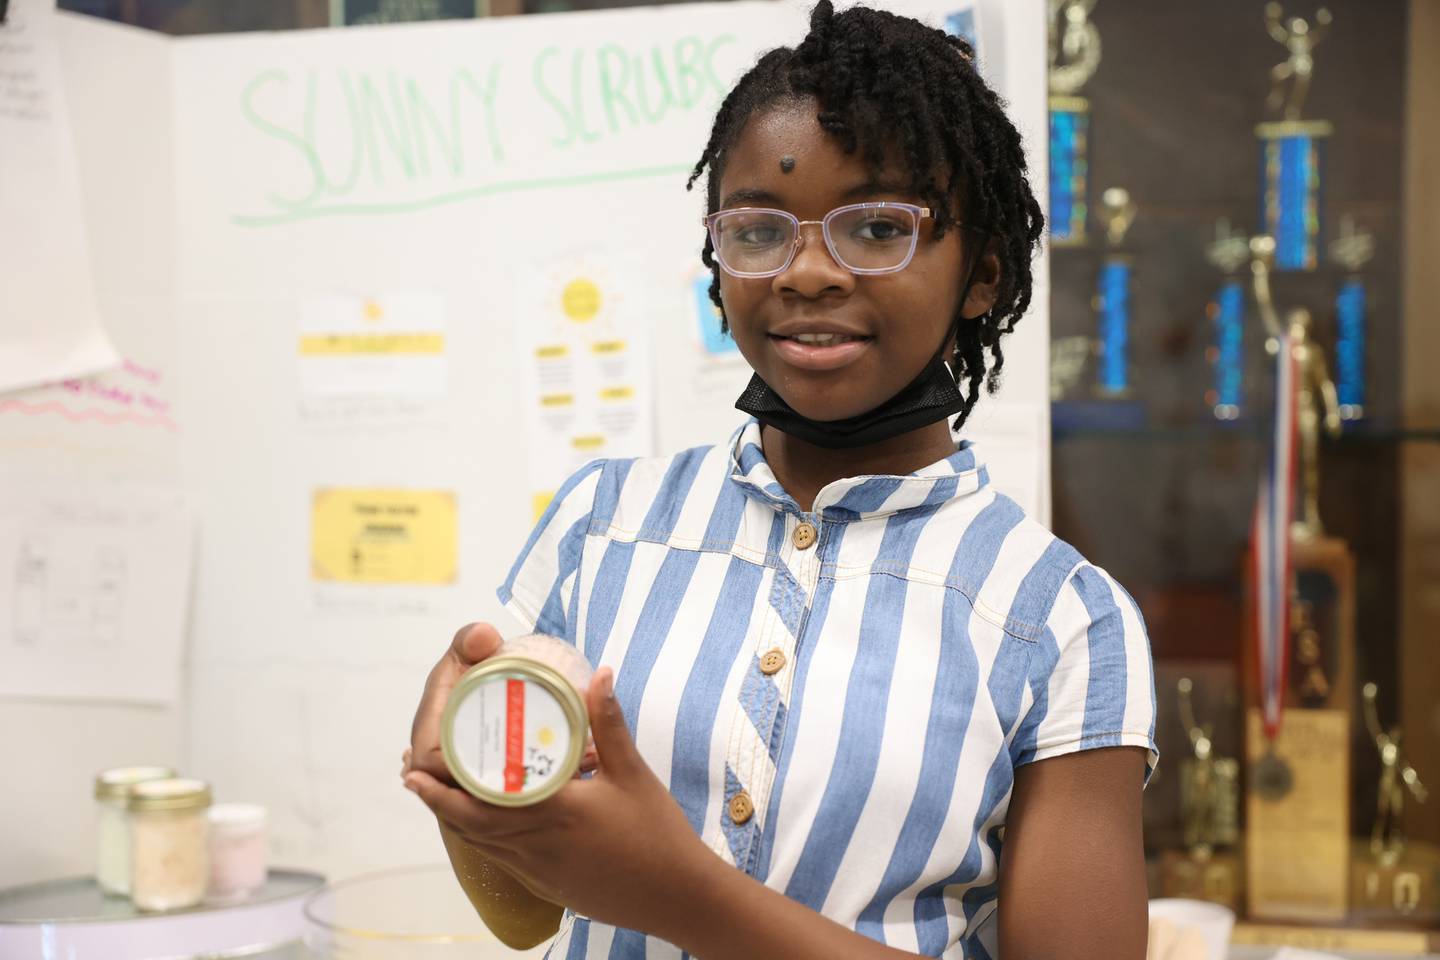 Ava Martin holds up a sugar based facial scrub from her Sunny Scrub business at the Laraway 70C 5th Grade Business Expo. Friday, May 13, 2022, in Joliet.